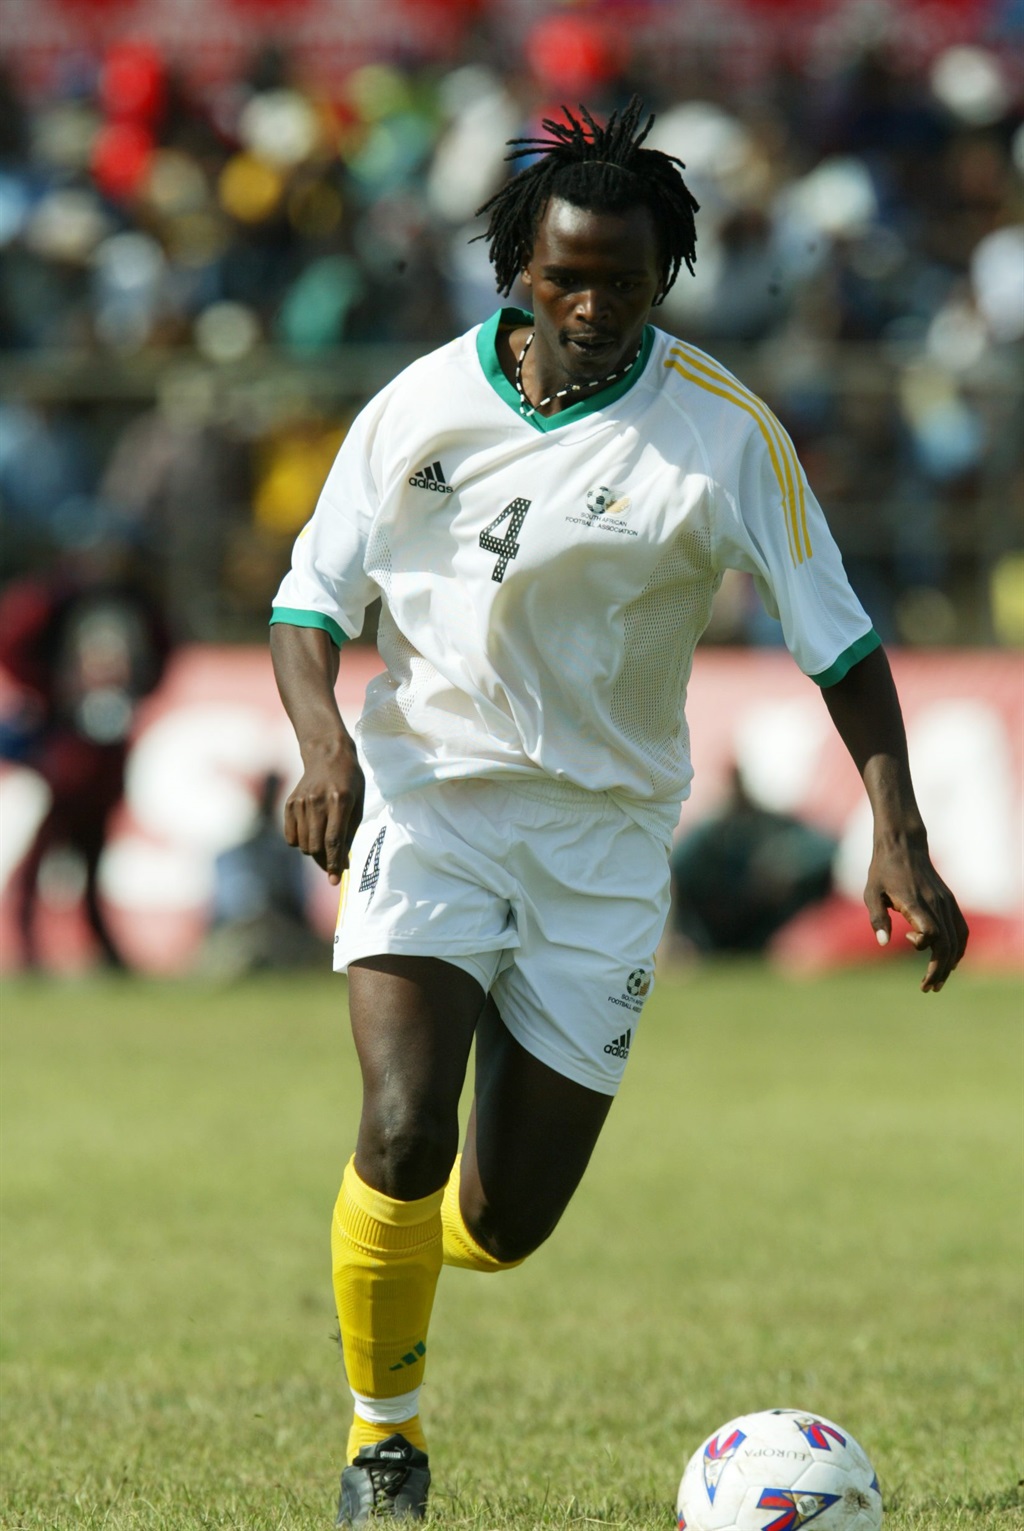 23 October 2002, South Africa v Kenya, Castle Lager Cup, 1st semifinal, Sheikh Amri Abeid Stadium, Arusha, Tanzania. Calvin Motloung in action for SA Photo Credit: - Gallo Images